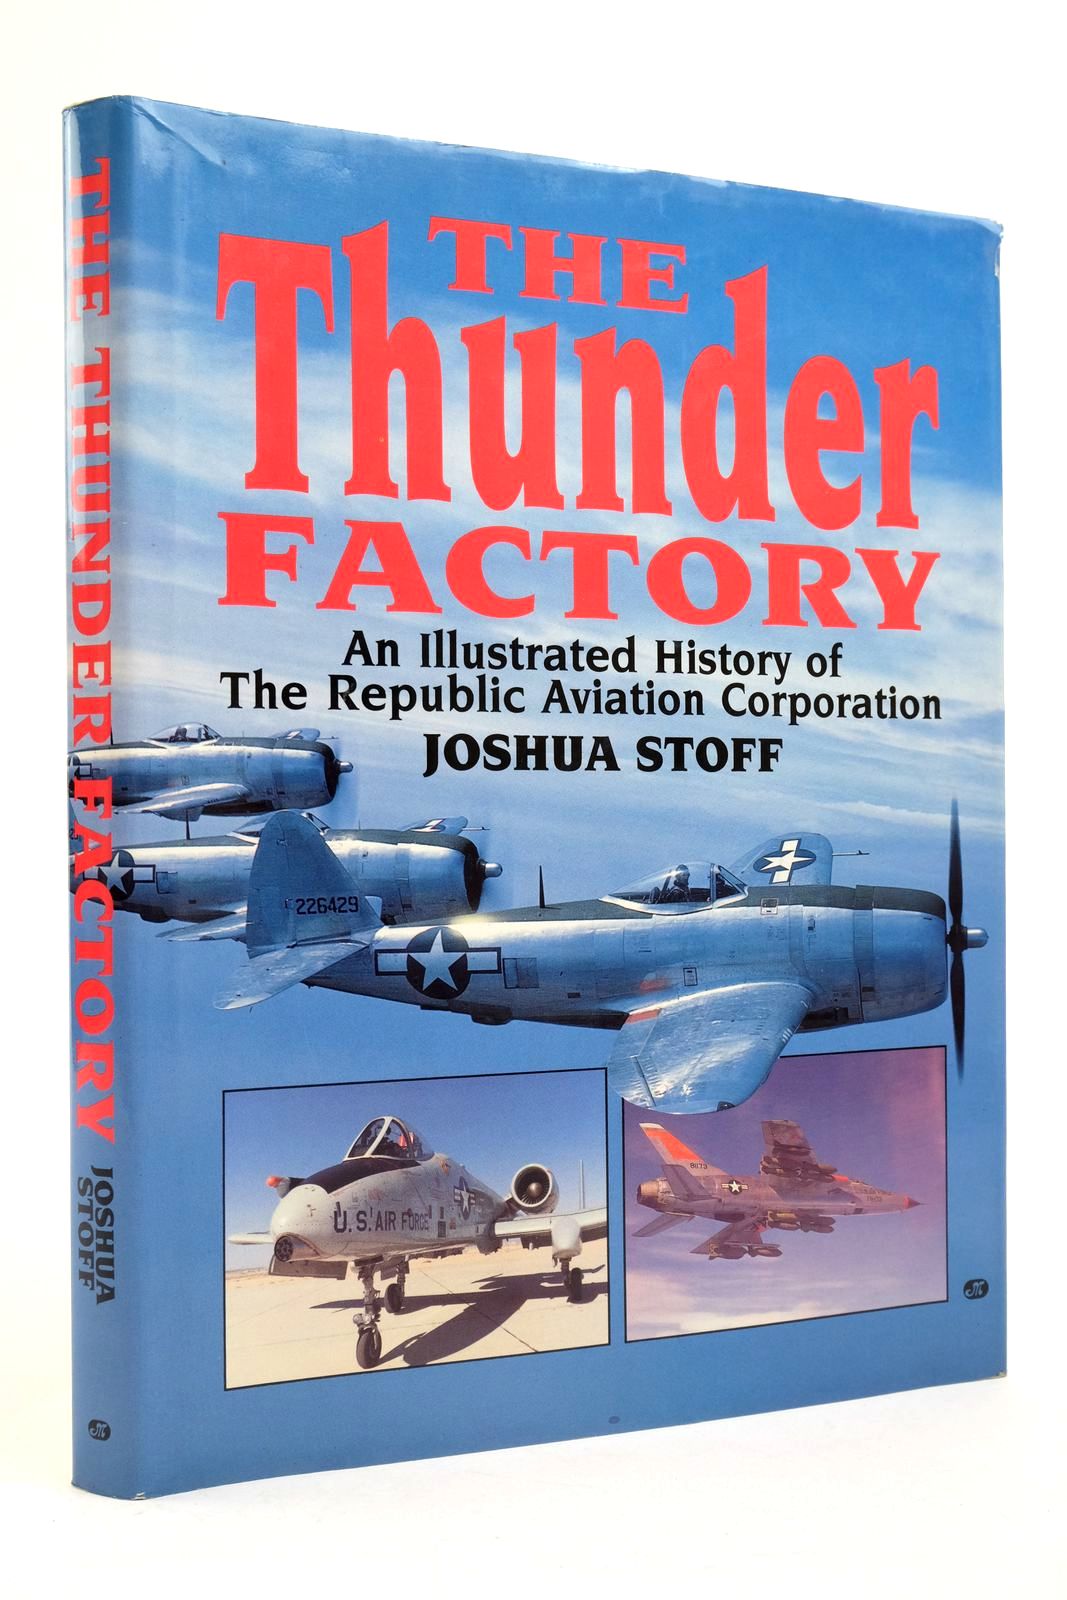 Photo of THE THUNDER FACTORY written by Stoff, Joshua published by Motorbooks International (STOCK CODE: 2138648)  for sale by Stella & Rose's Books